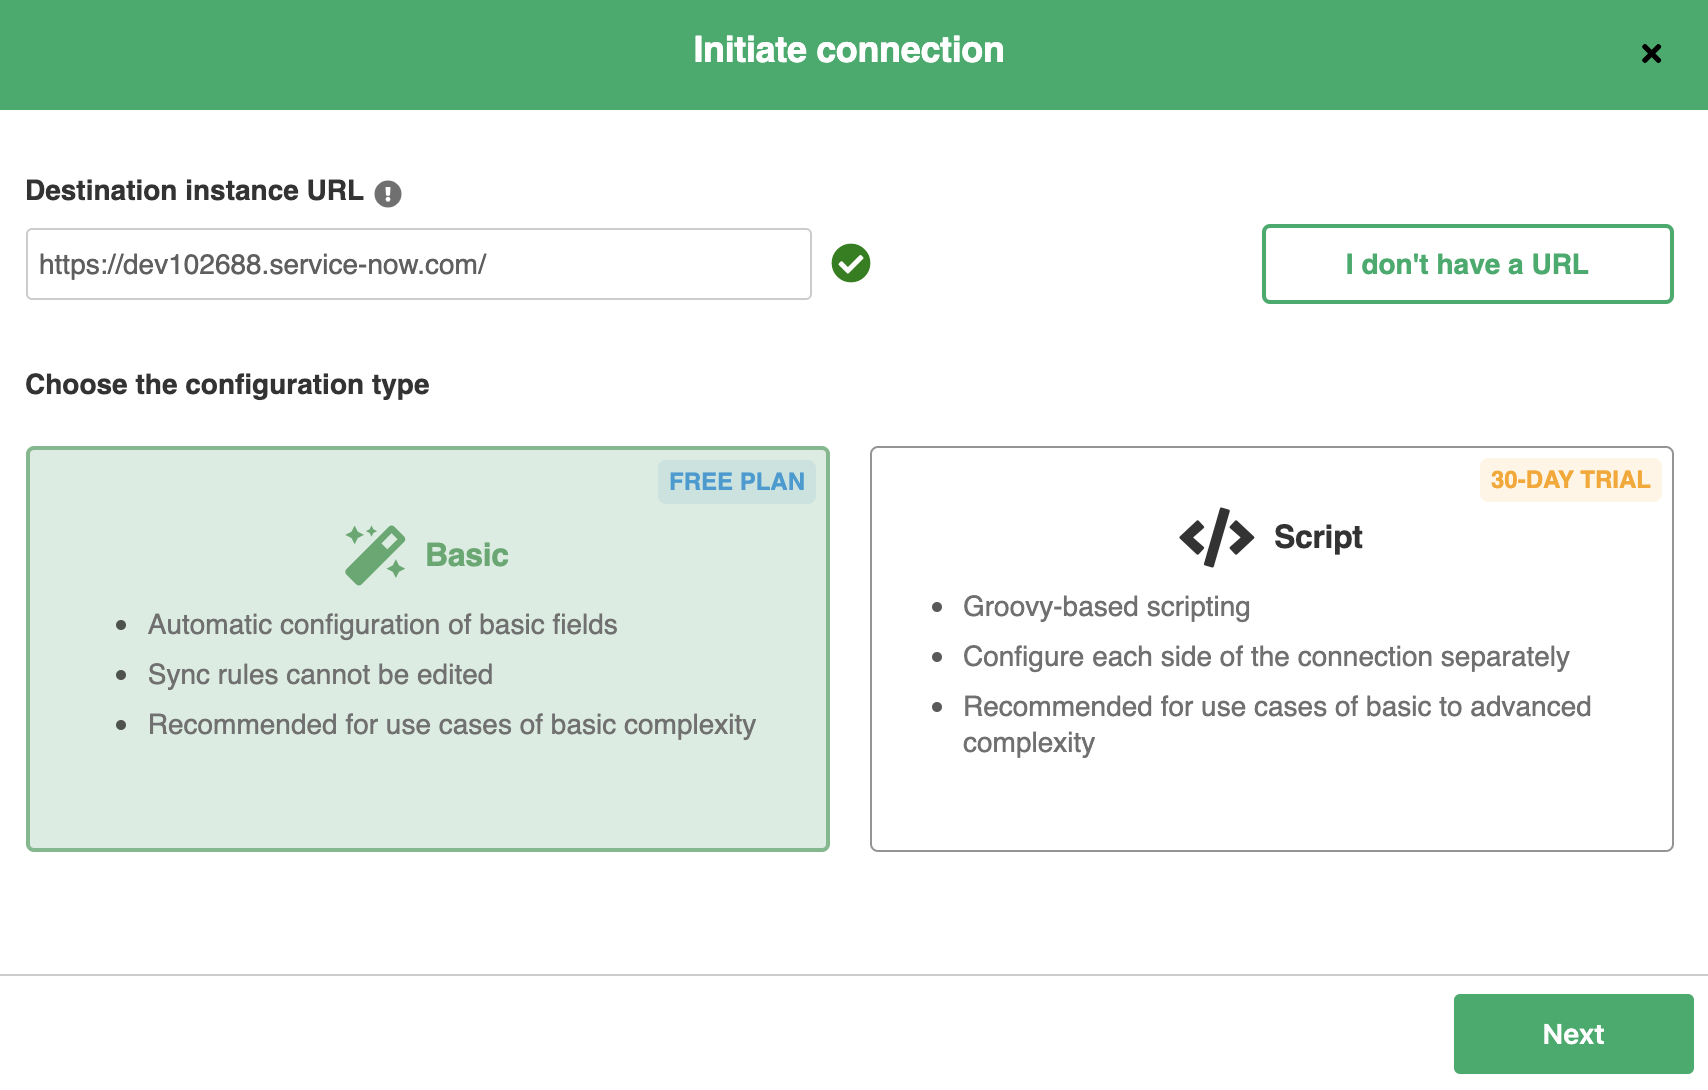 Initiate connection between Github and ServiceNow